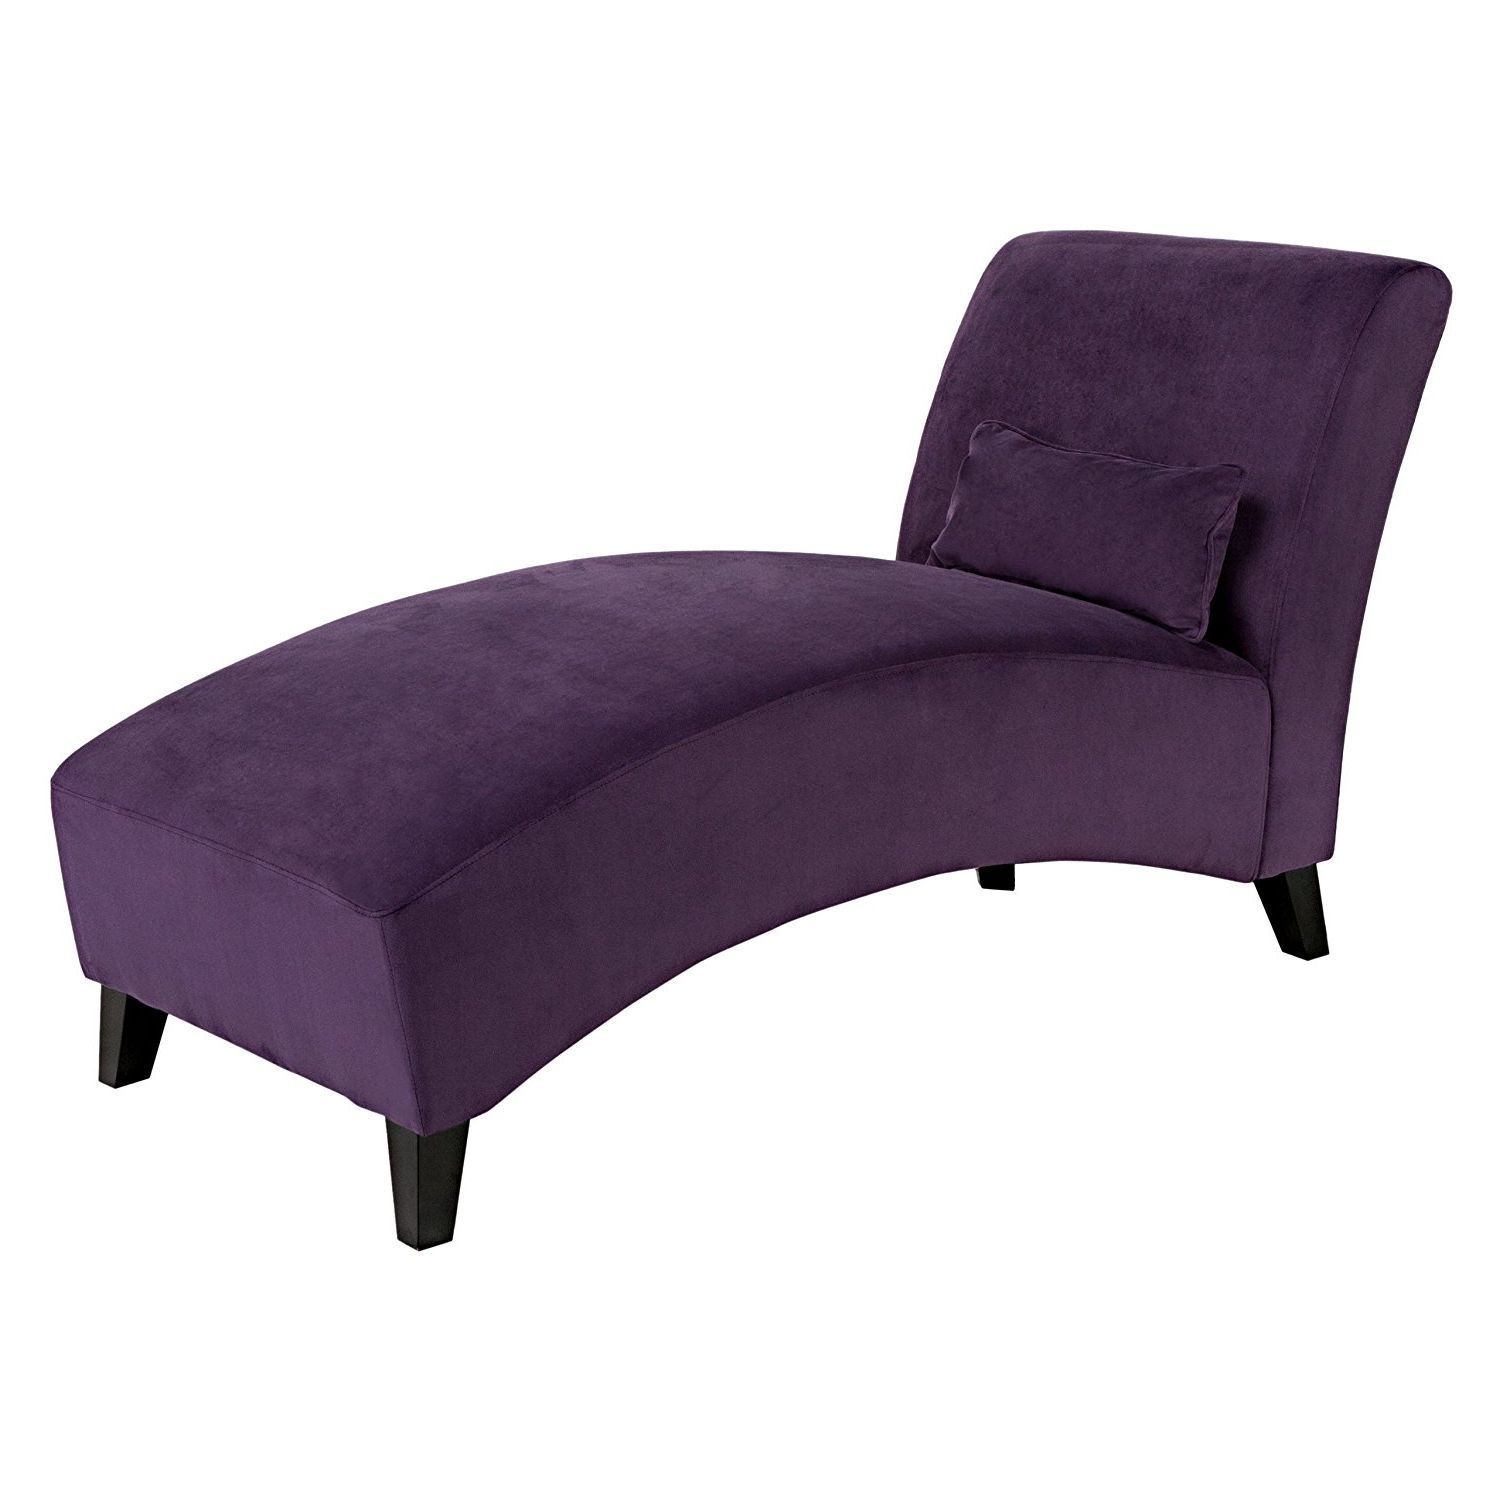 Well Liked Chaise Lounge Chairs With Amazon: Handy Living Chaise Lounge Chair, Purple: Kitchen & Dining (View 11 of 15)